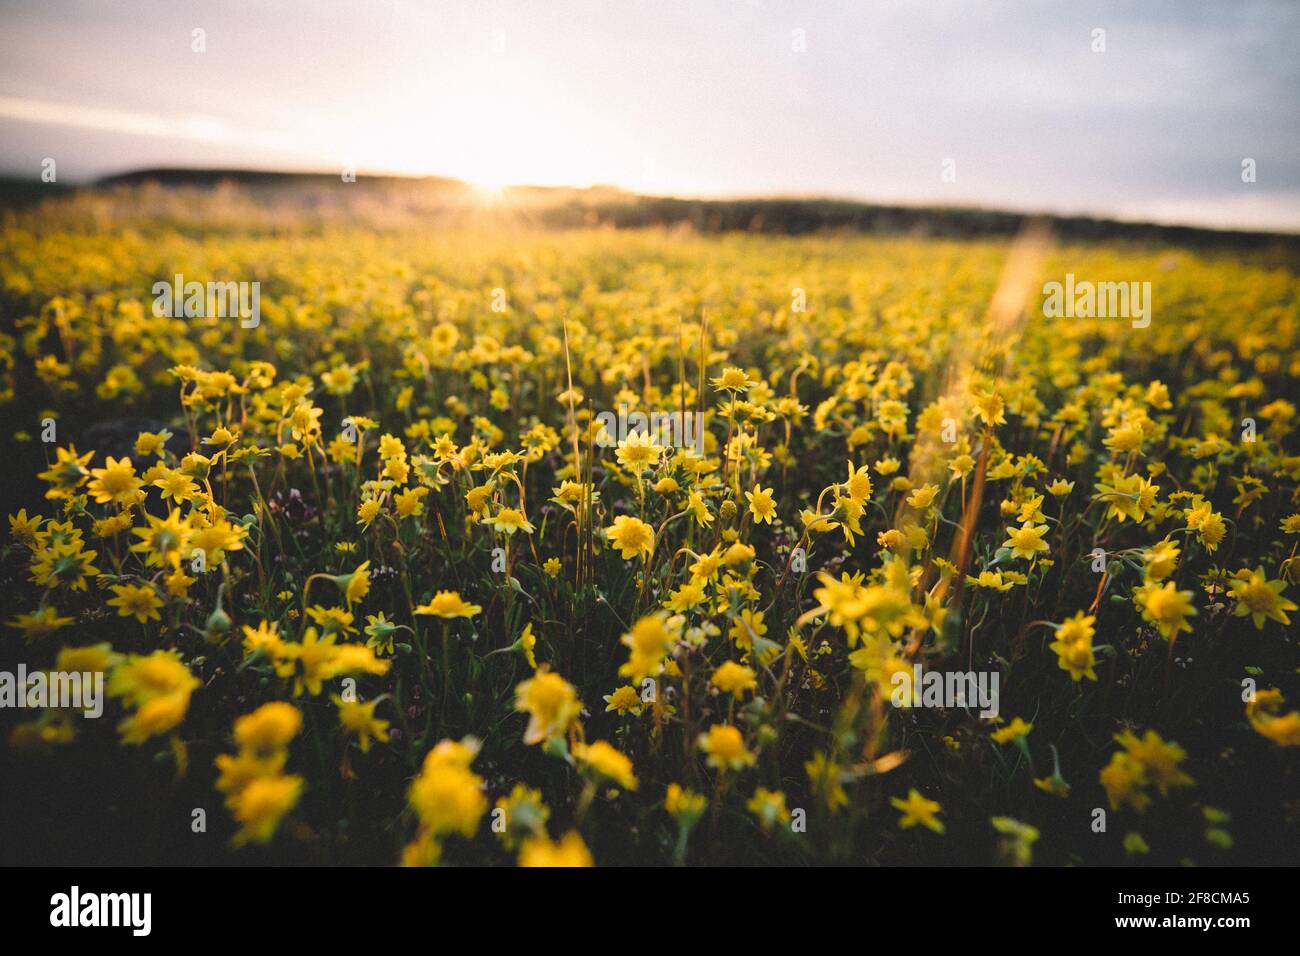 Tiny Yellow Flowers Blanket a Field at Sunset Stock Photo